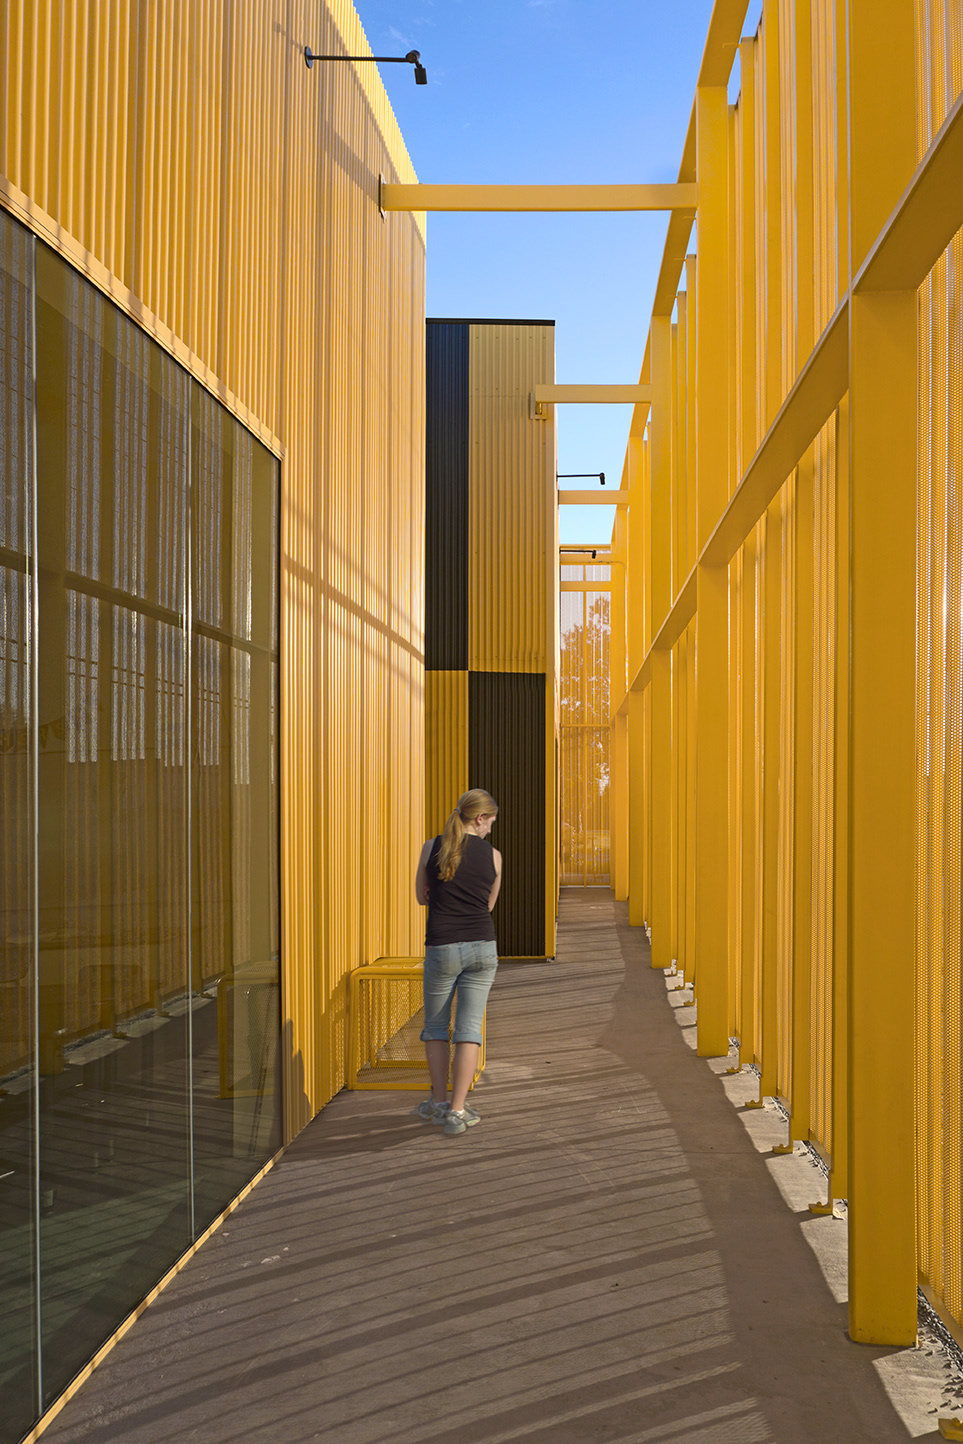 Adobe Portfolio animo south los charter high school Green Dot School lawrence scarpa perforated metal facade recycled concrete School Design Yellow school built around oil well modern school courtyard natural wool insulation perforated metal siding Yellow Building